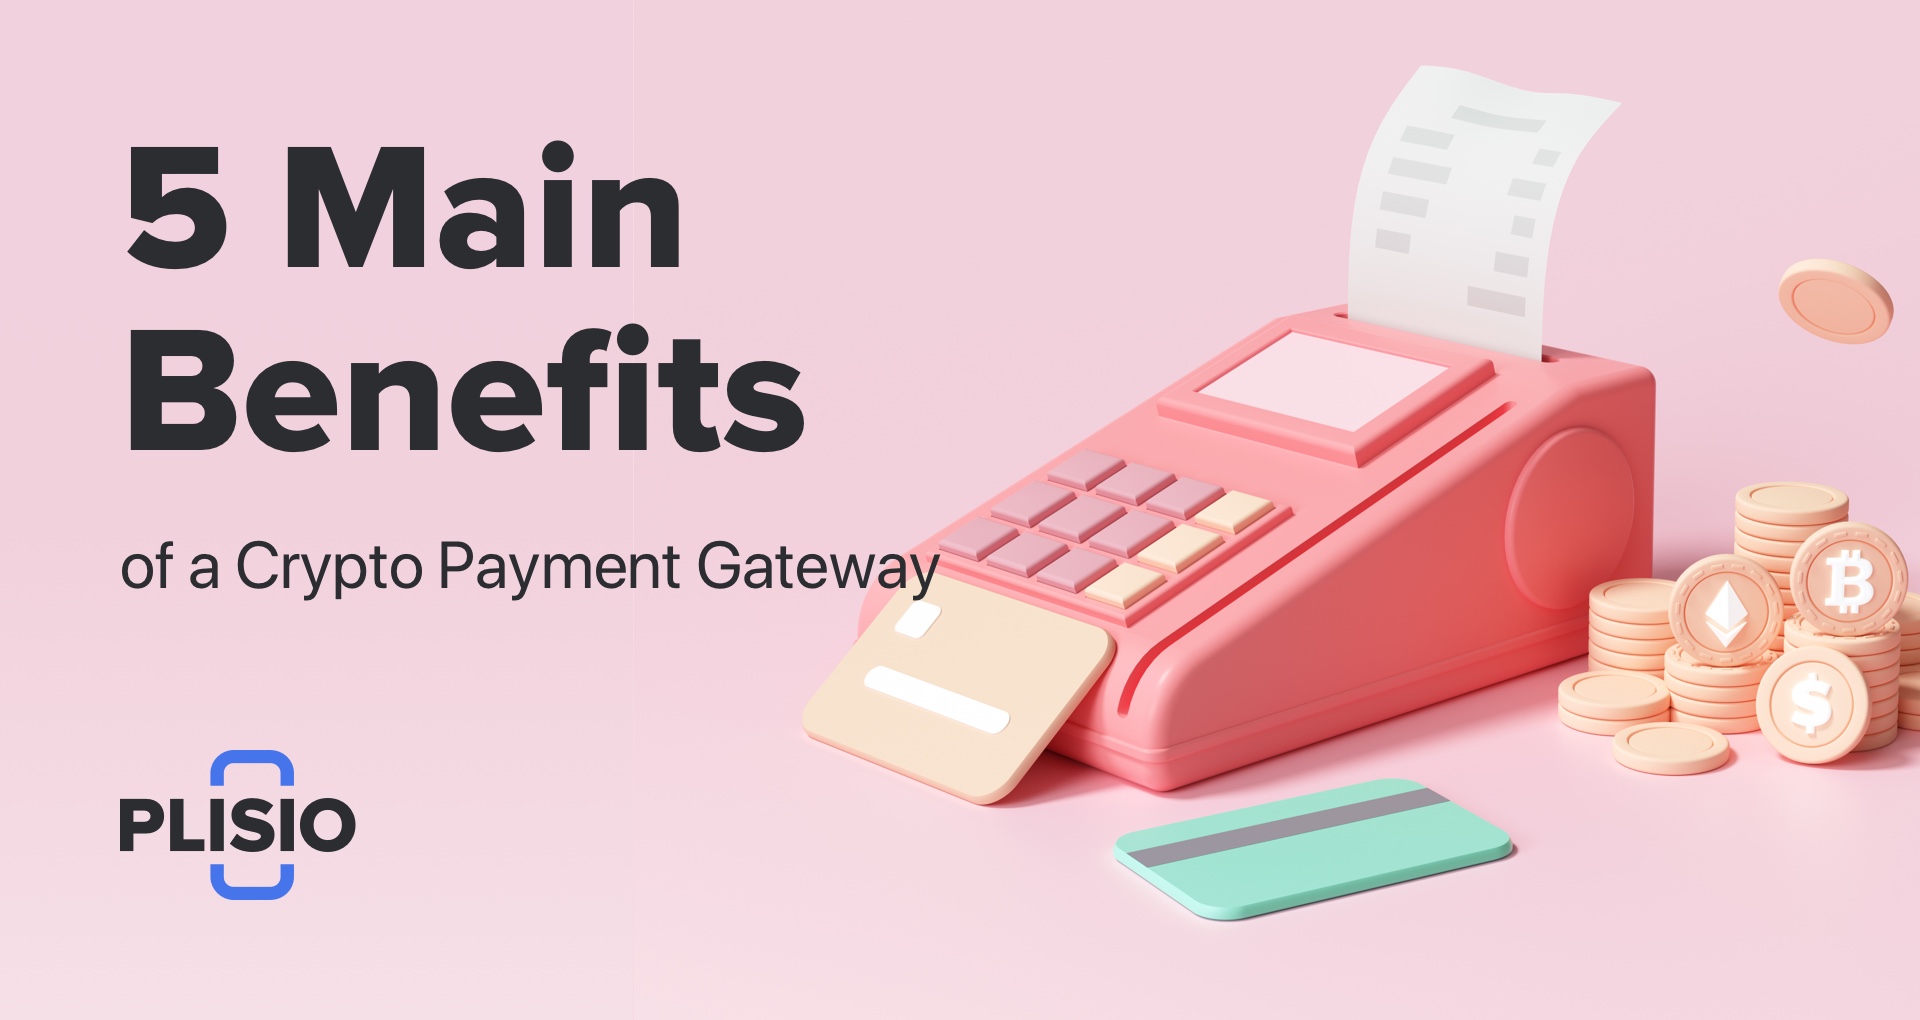 5 Main Benefits of a Crypto Payment Gateway